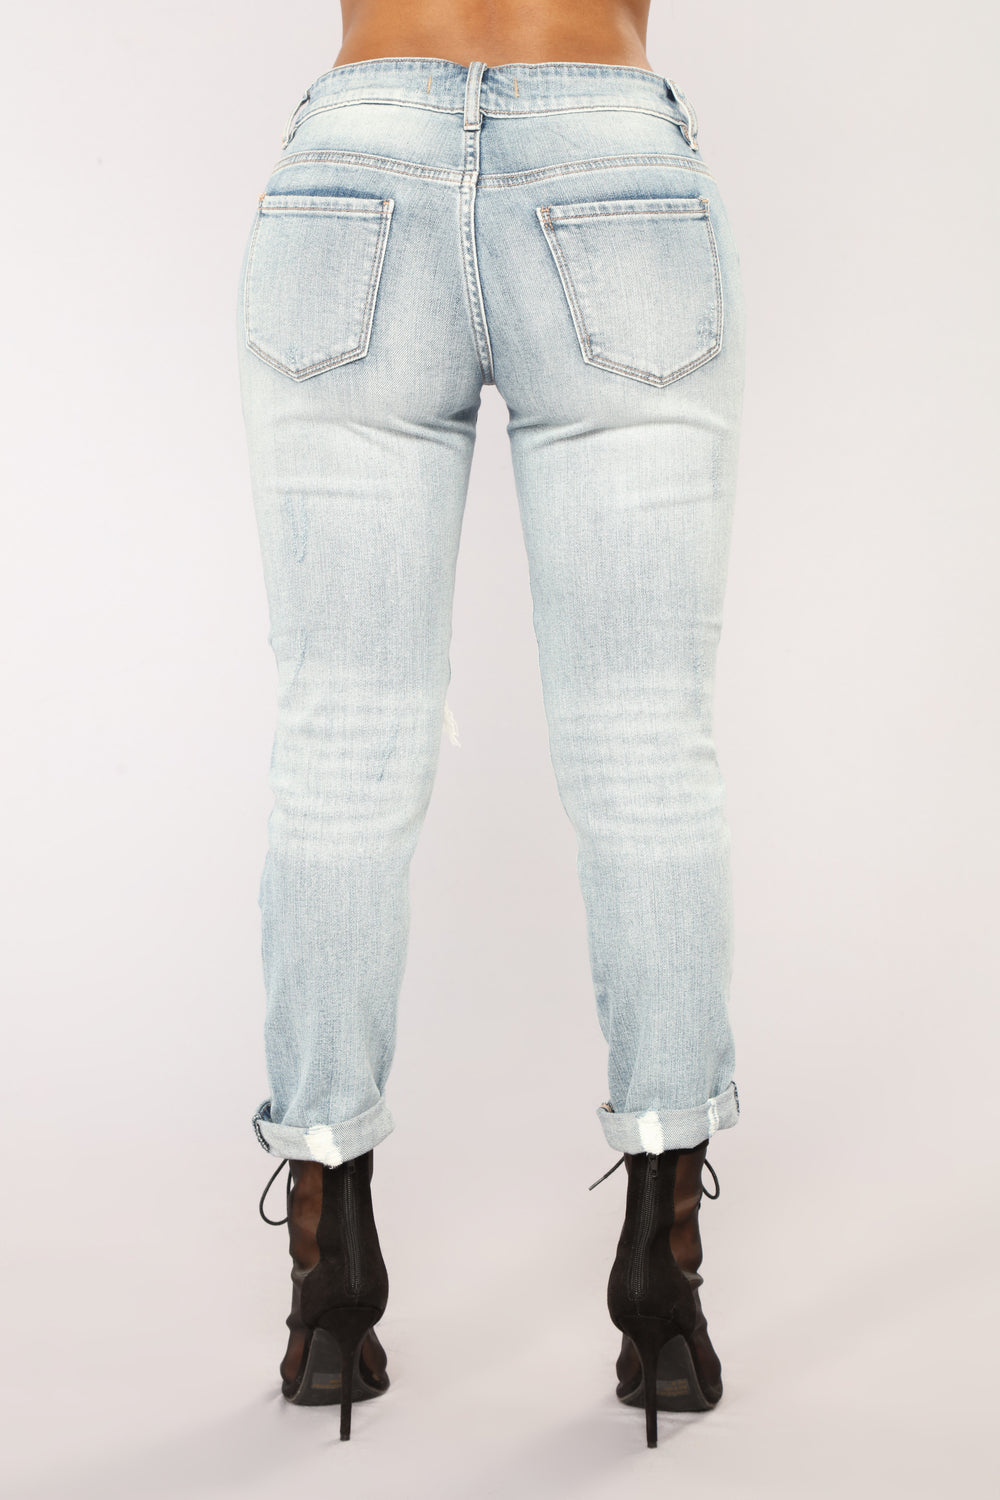 Love You To Pieces Ankle Jeans - Light Blue Wash